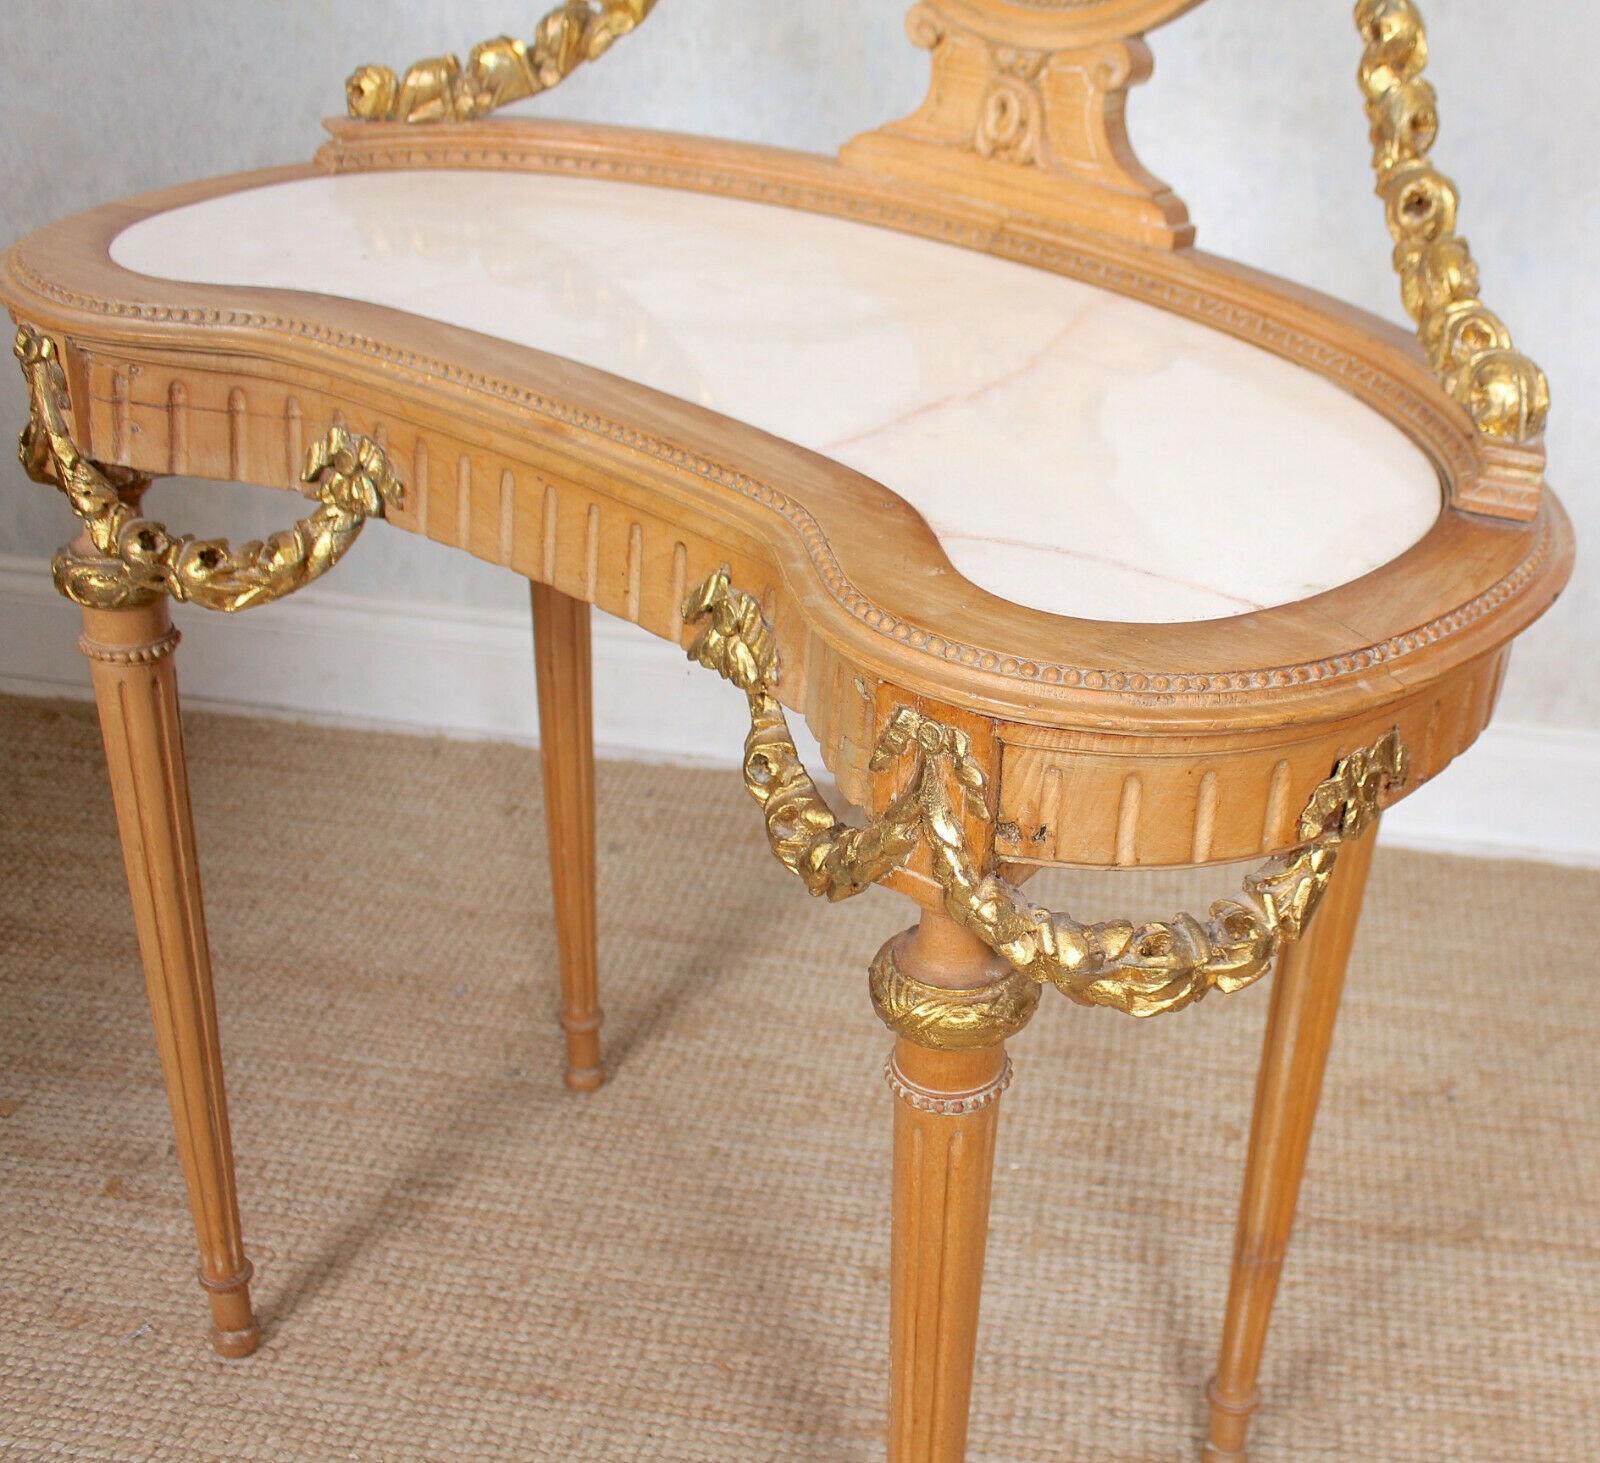 Neoclassical Marble Dressing Table Gilt Mirrored Vanity Satinwood In Good Condition For Sale In Newcastle upon Tyne, GB